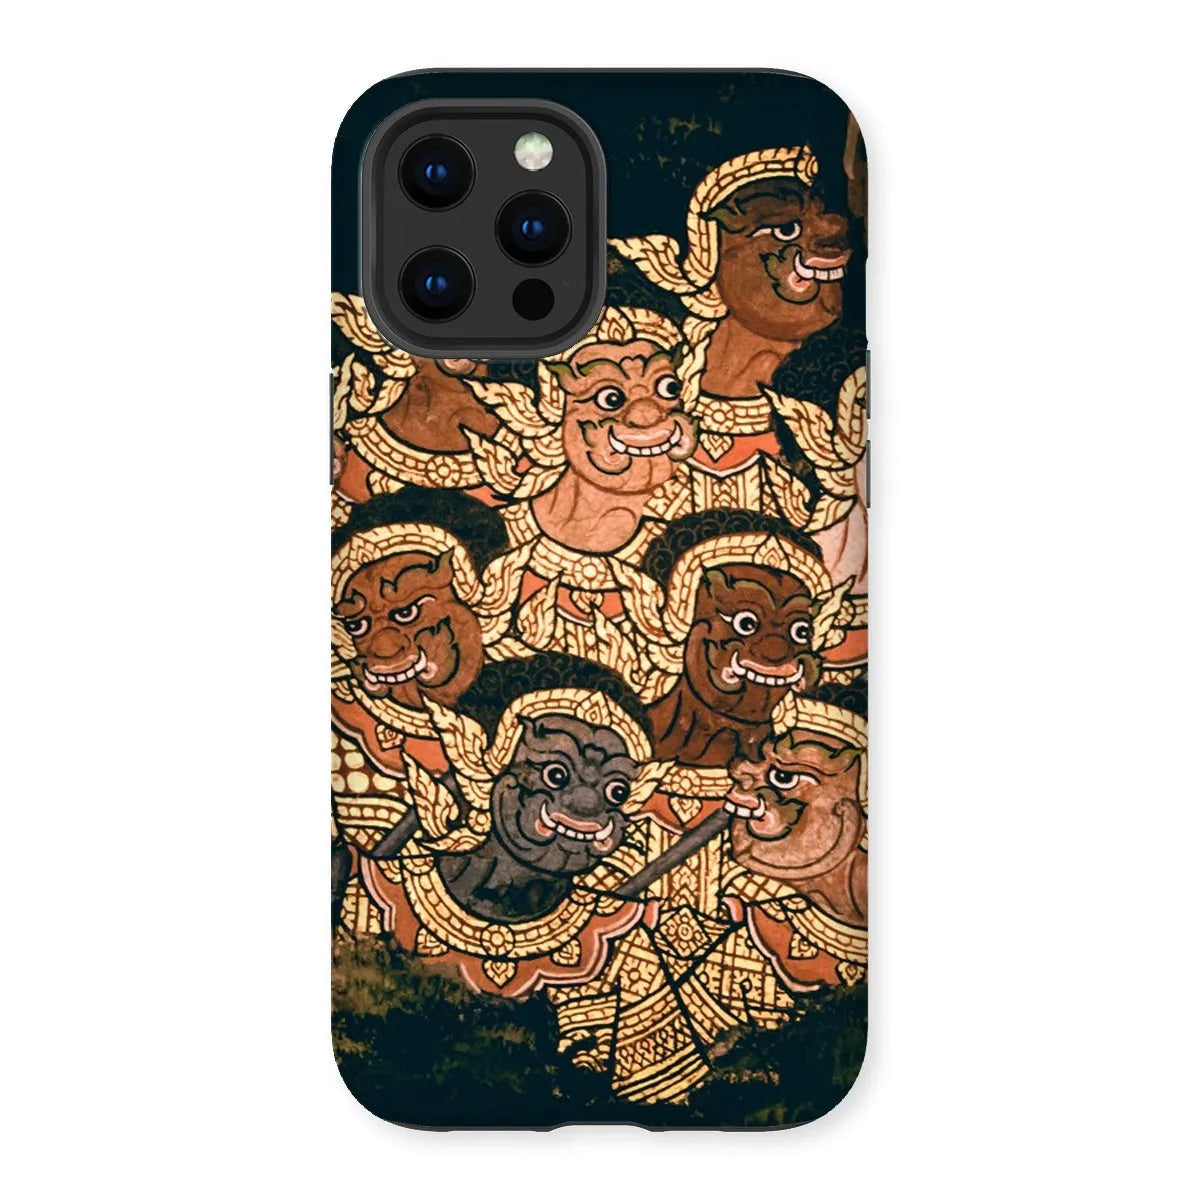 Babes In The Woods - Thailand Aesthetic Art Phone Case - Iphone 12 Pro Max / Matte - Mobile Phone Cases - Aesthetic Art